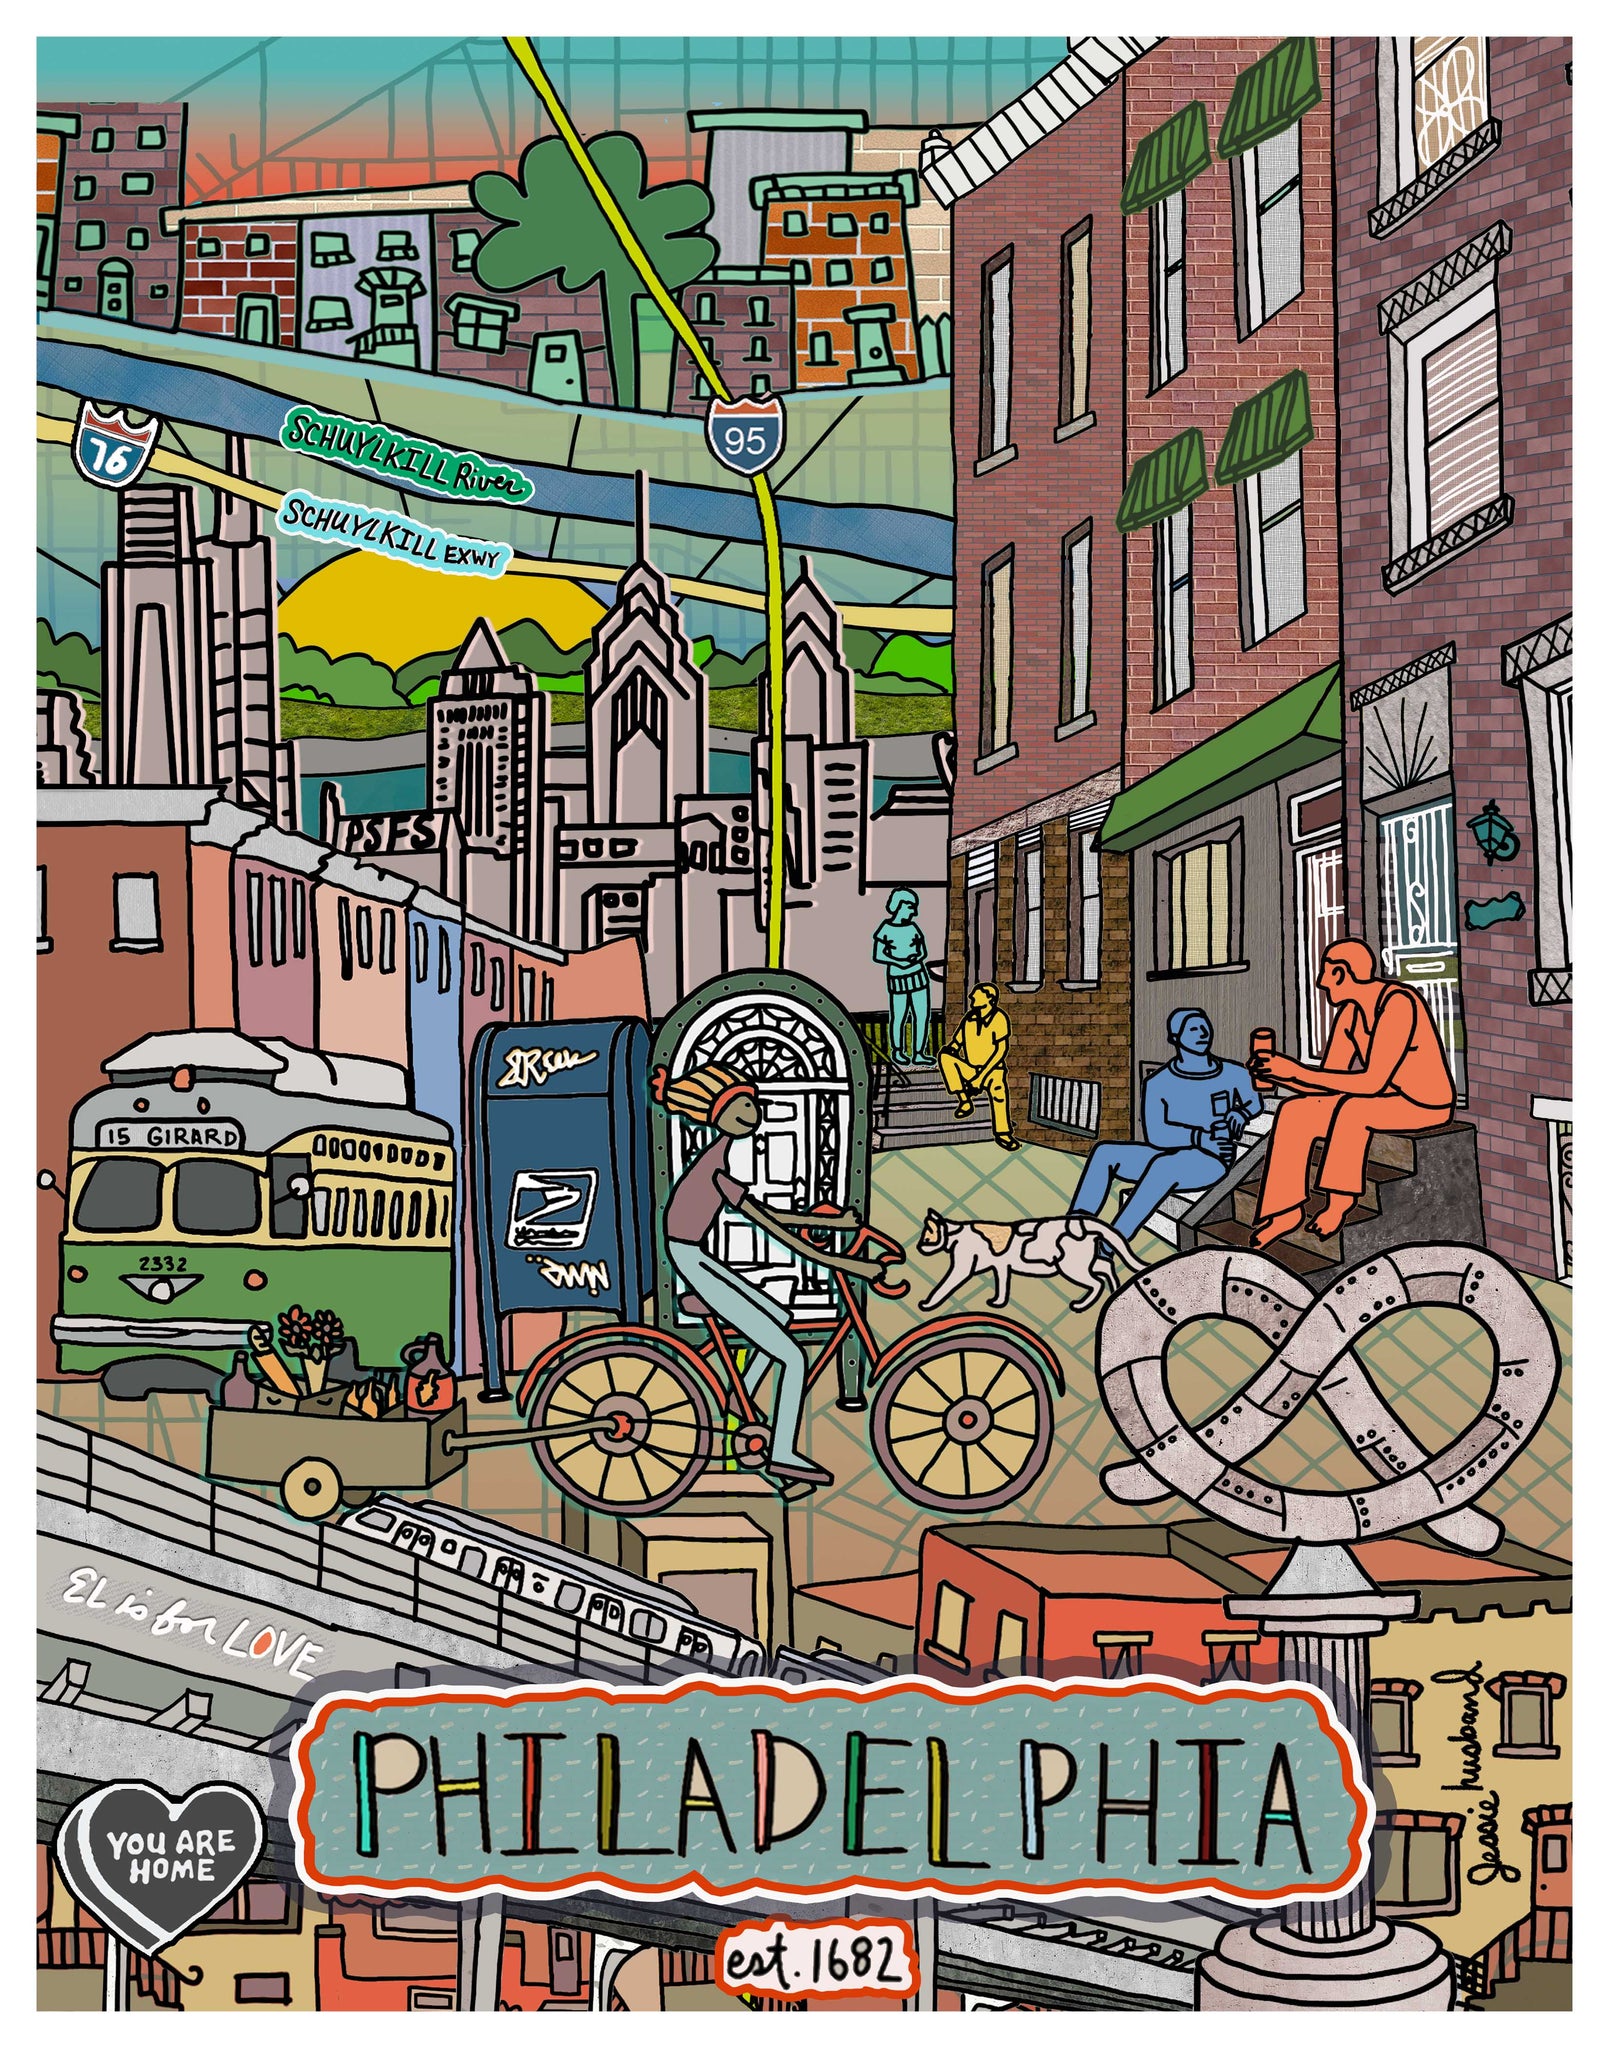 Philadelphia, you are home (framing options available)